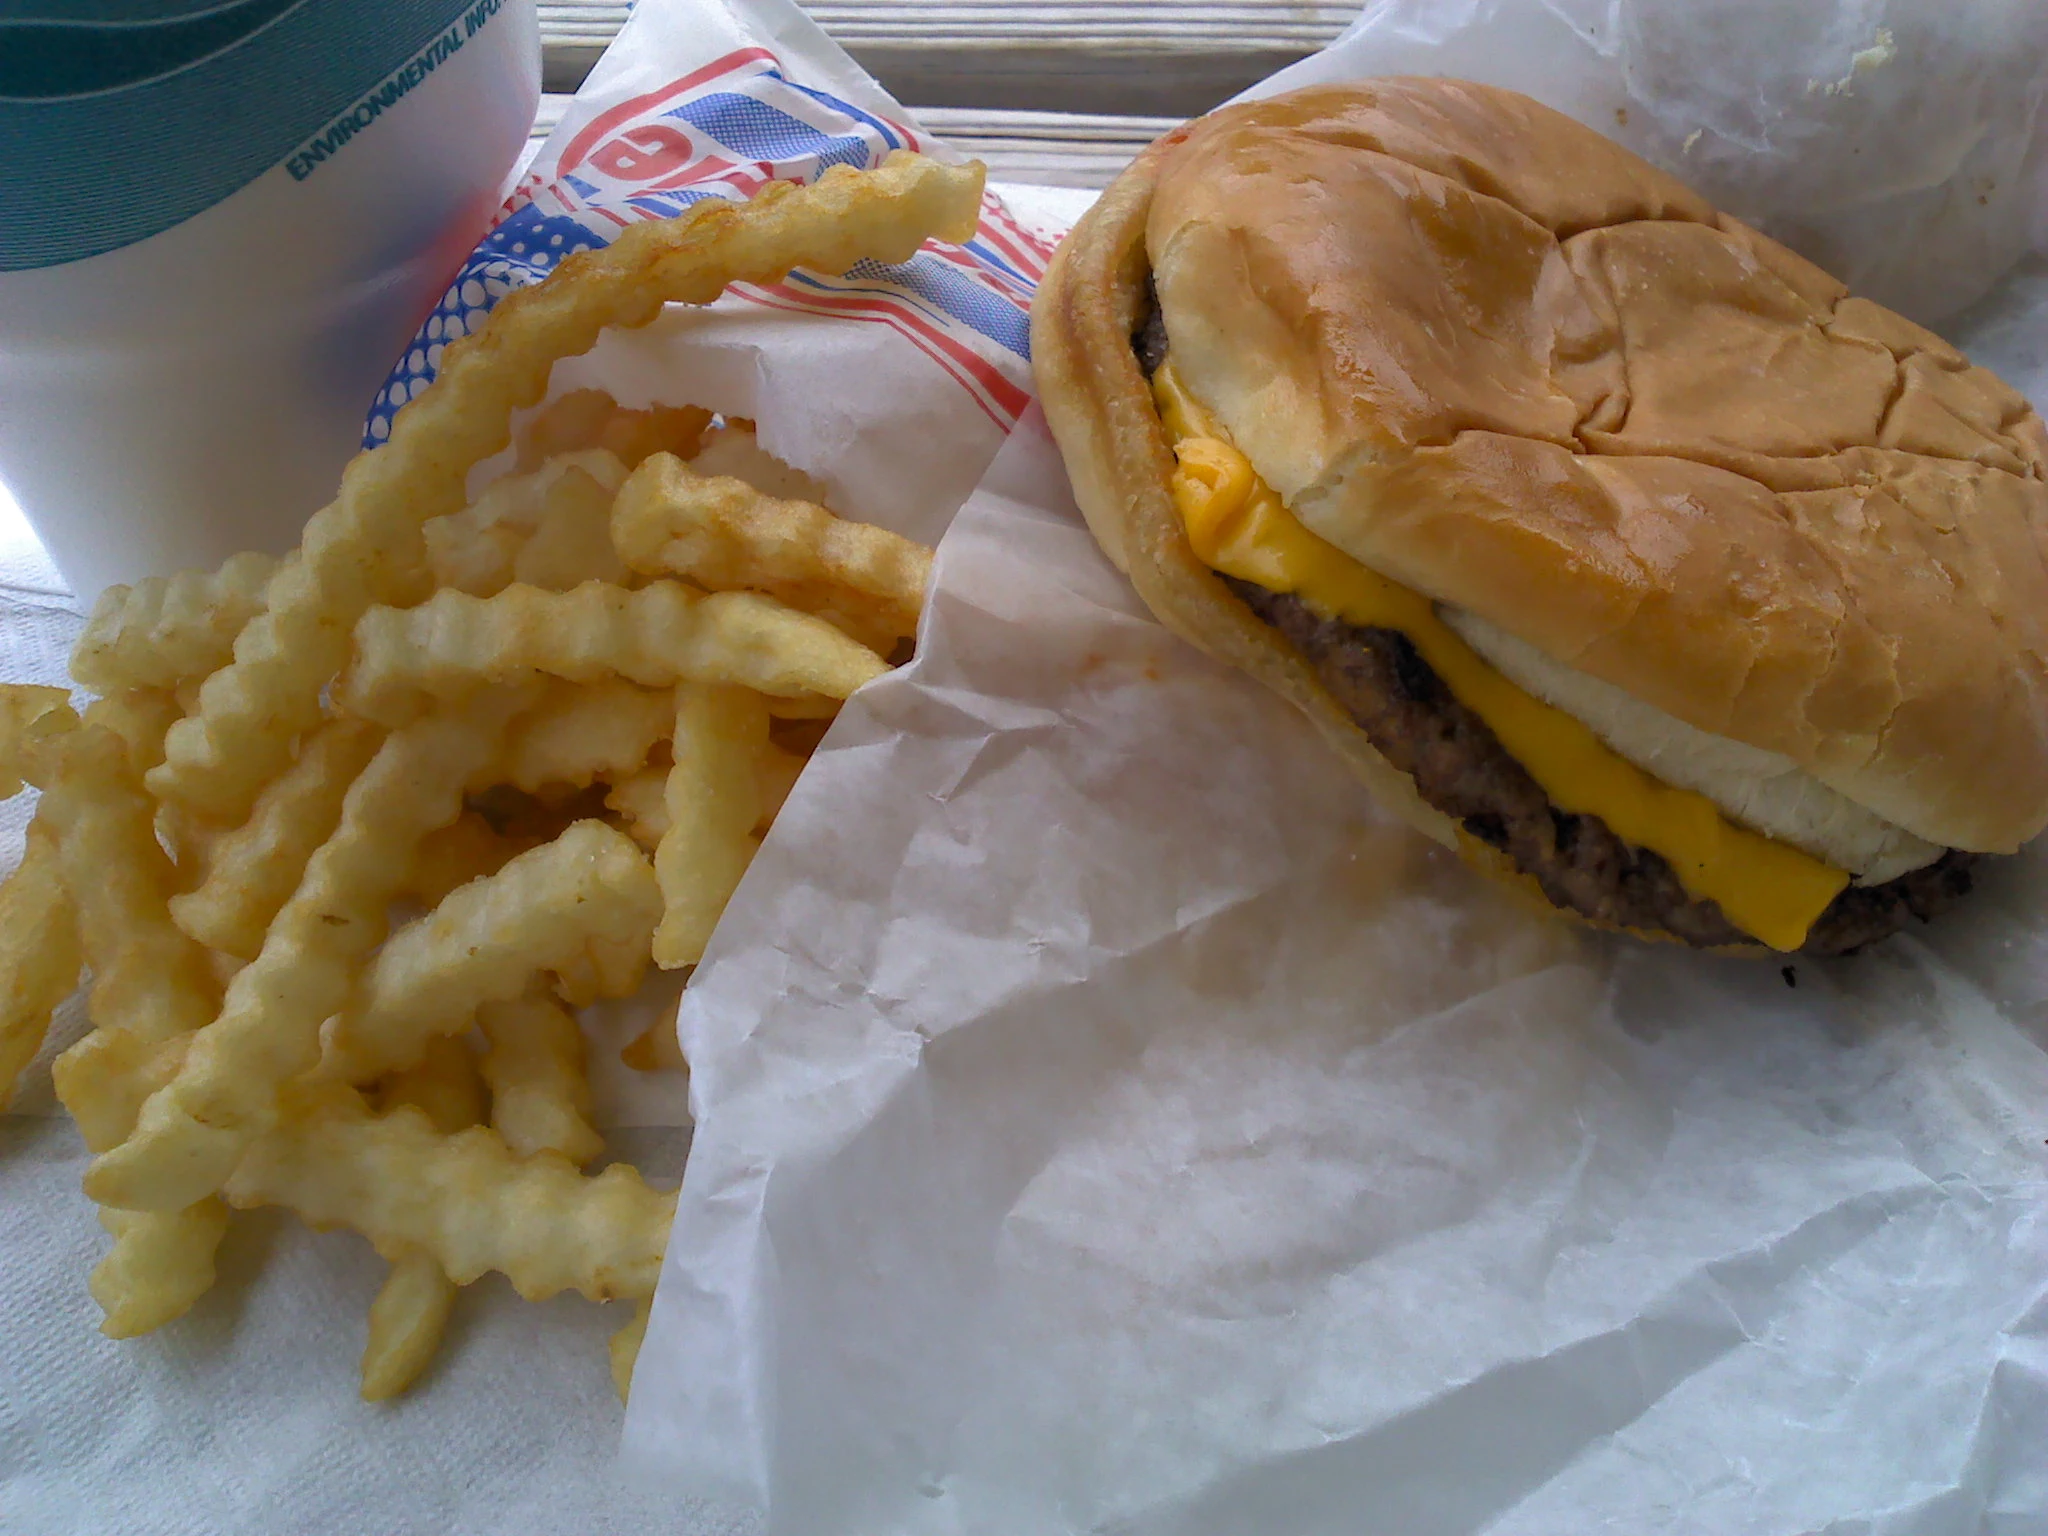 Revisiting Evansville's Classic Fast Food Hamburger Joints